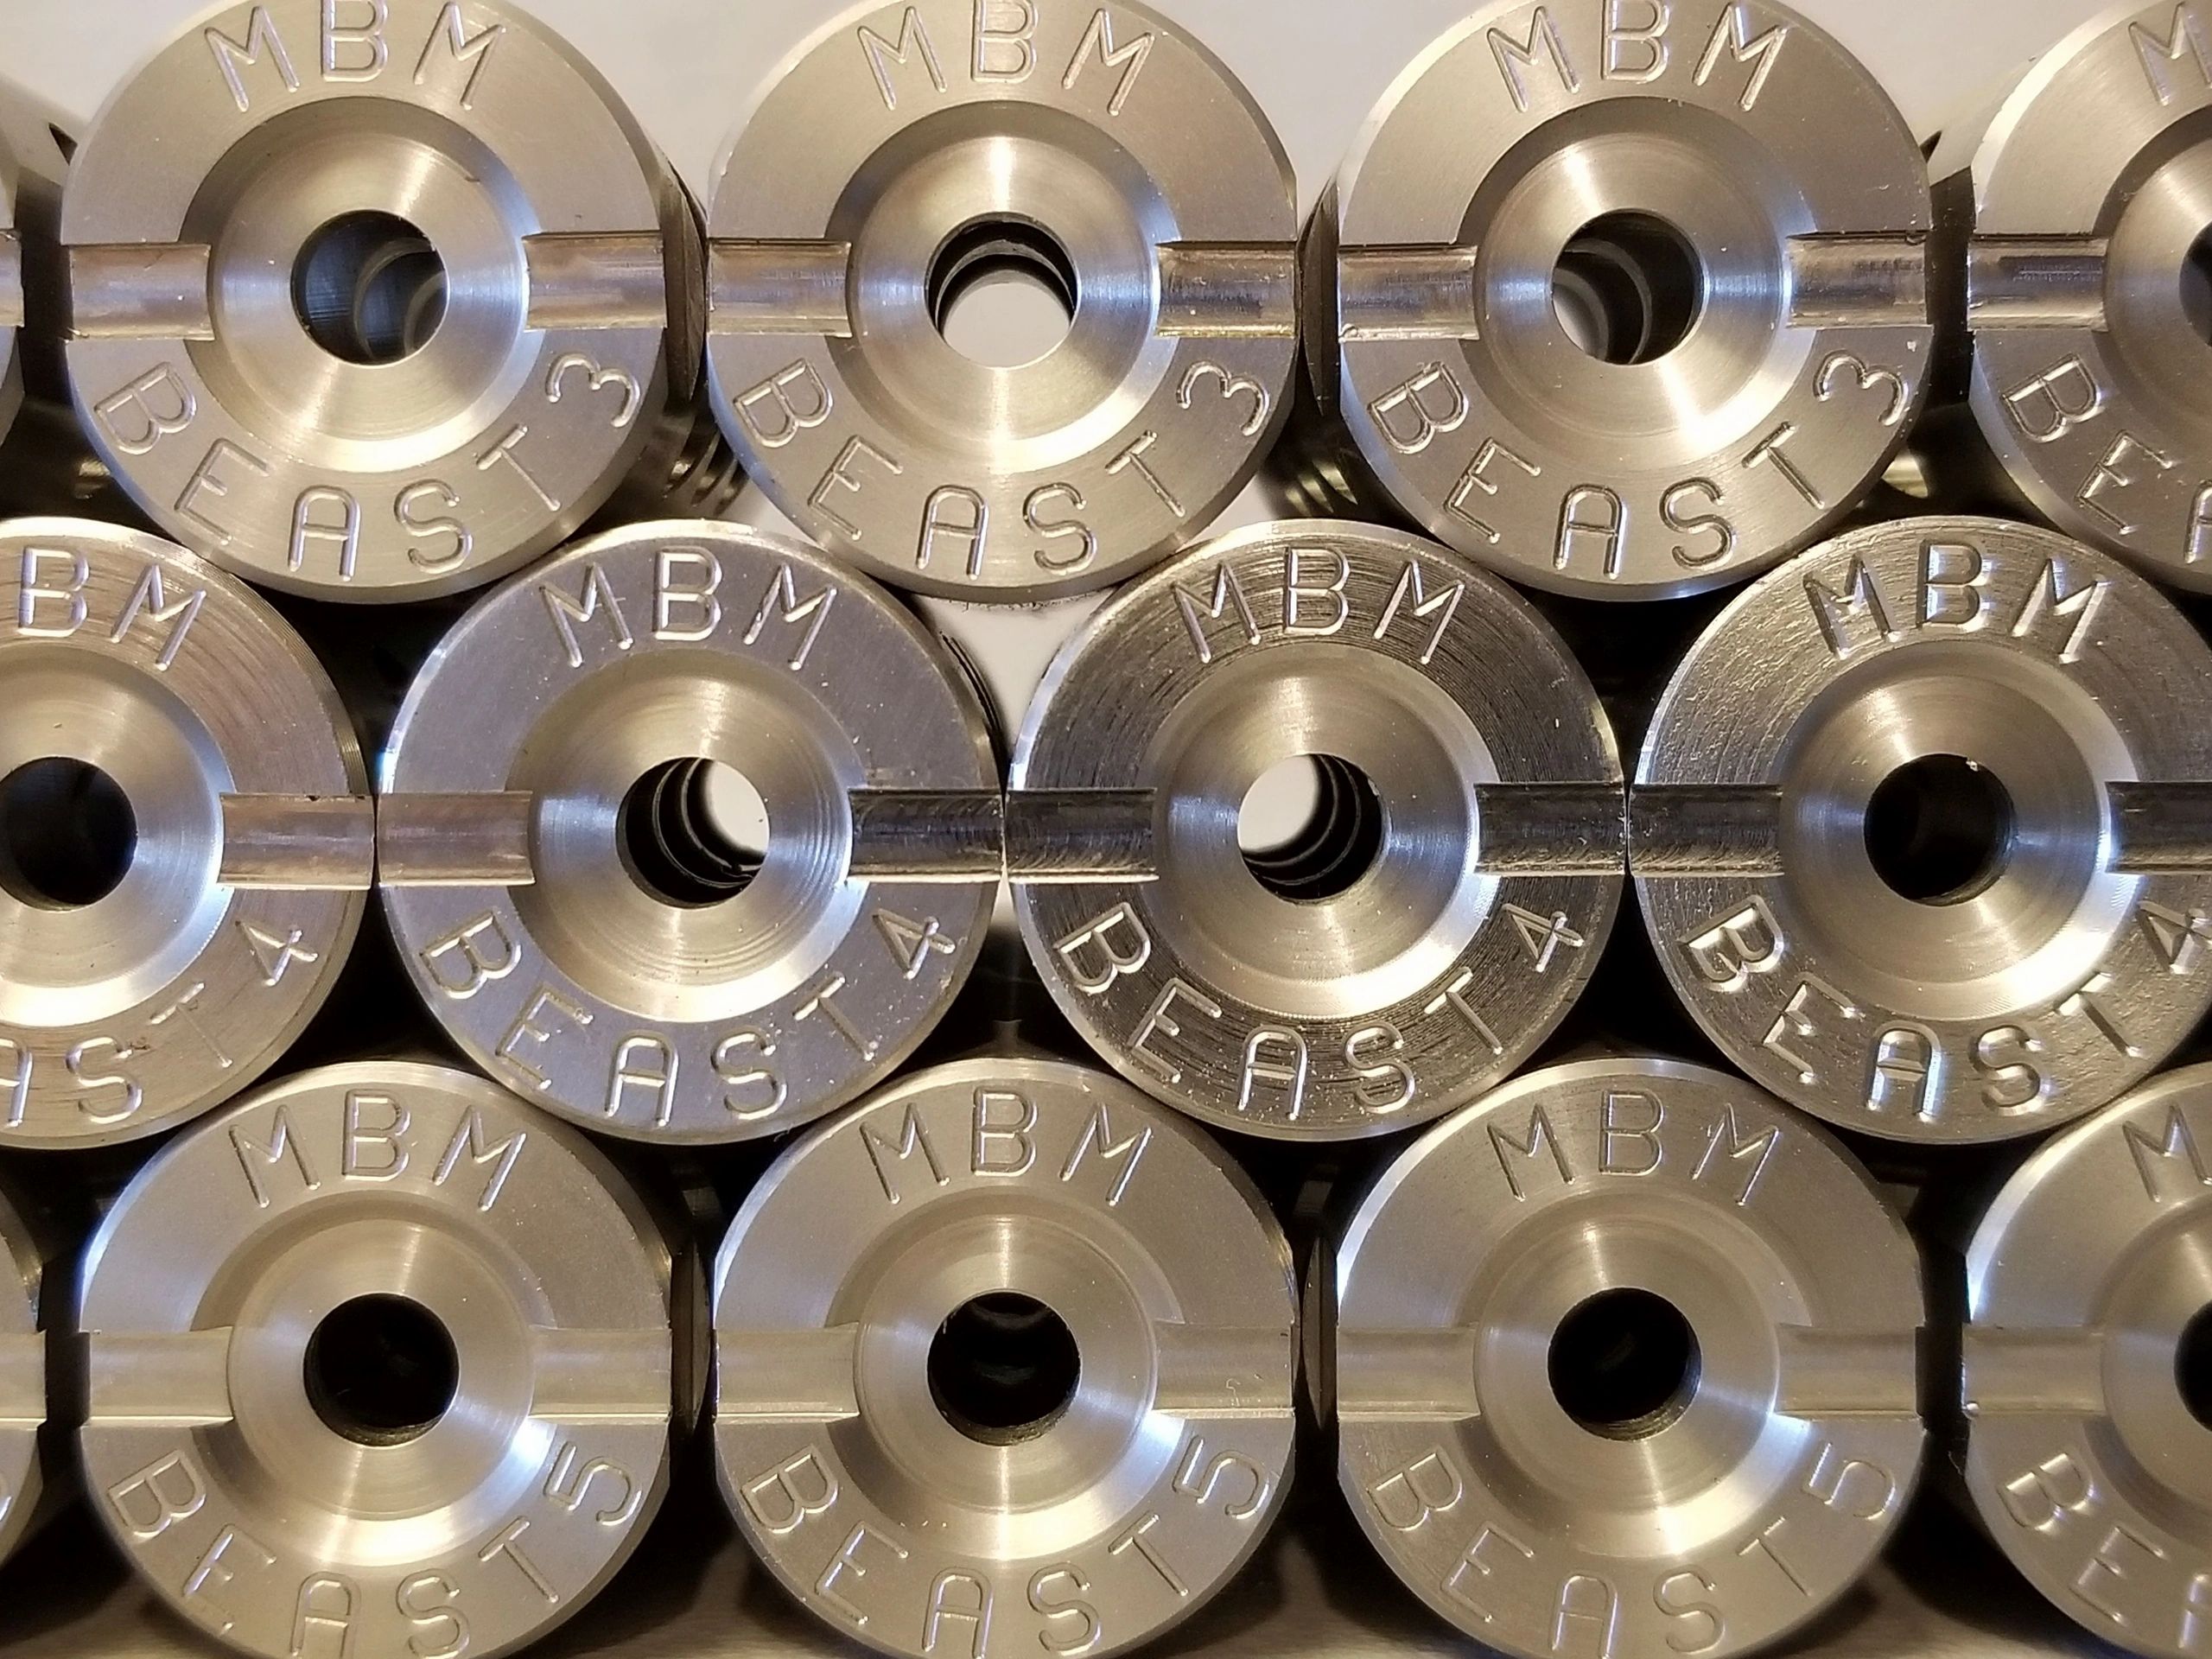 Muzzle Brakes And More Muzzle Brakes Bolt And Barrel Fluting